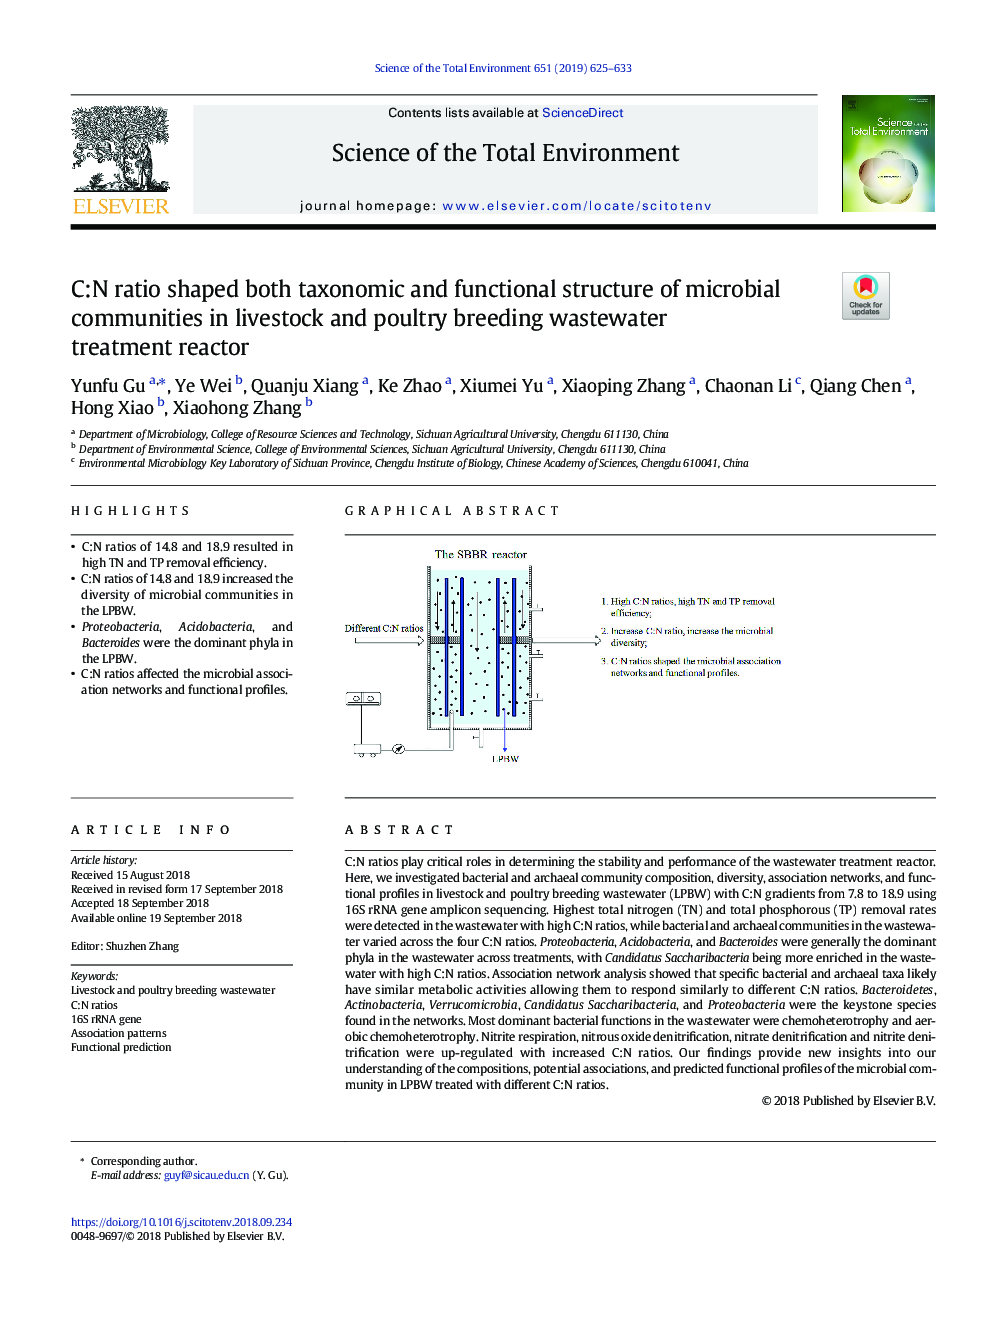 C:N ratio shaped both taxonomic and functional structure of microbial communities in livestock and poultry breeding wastewater treatment reactor